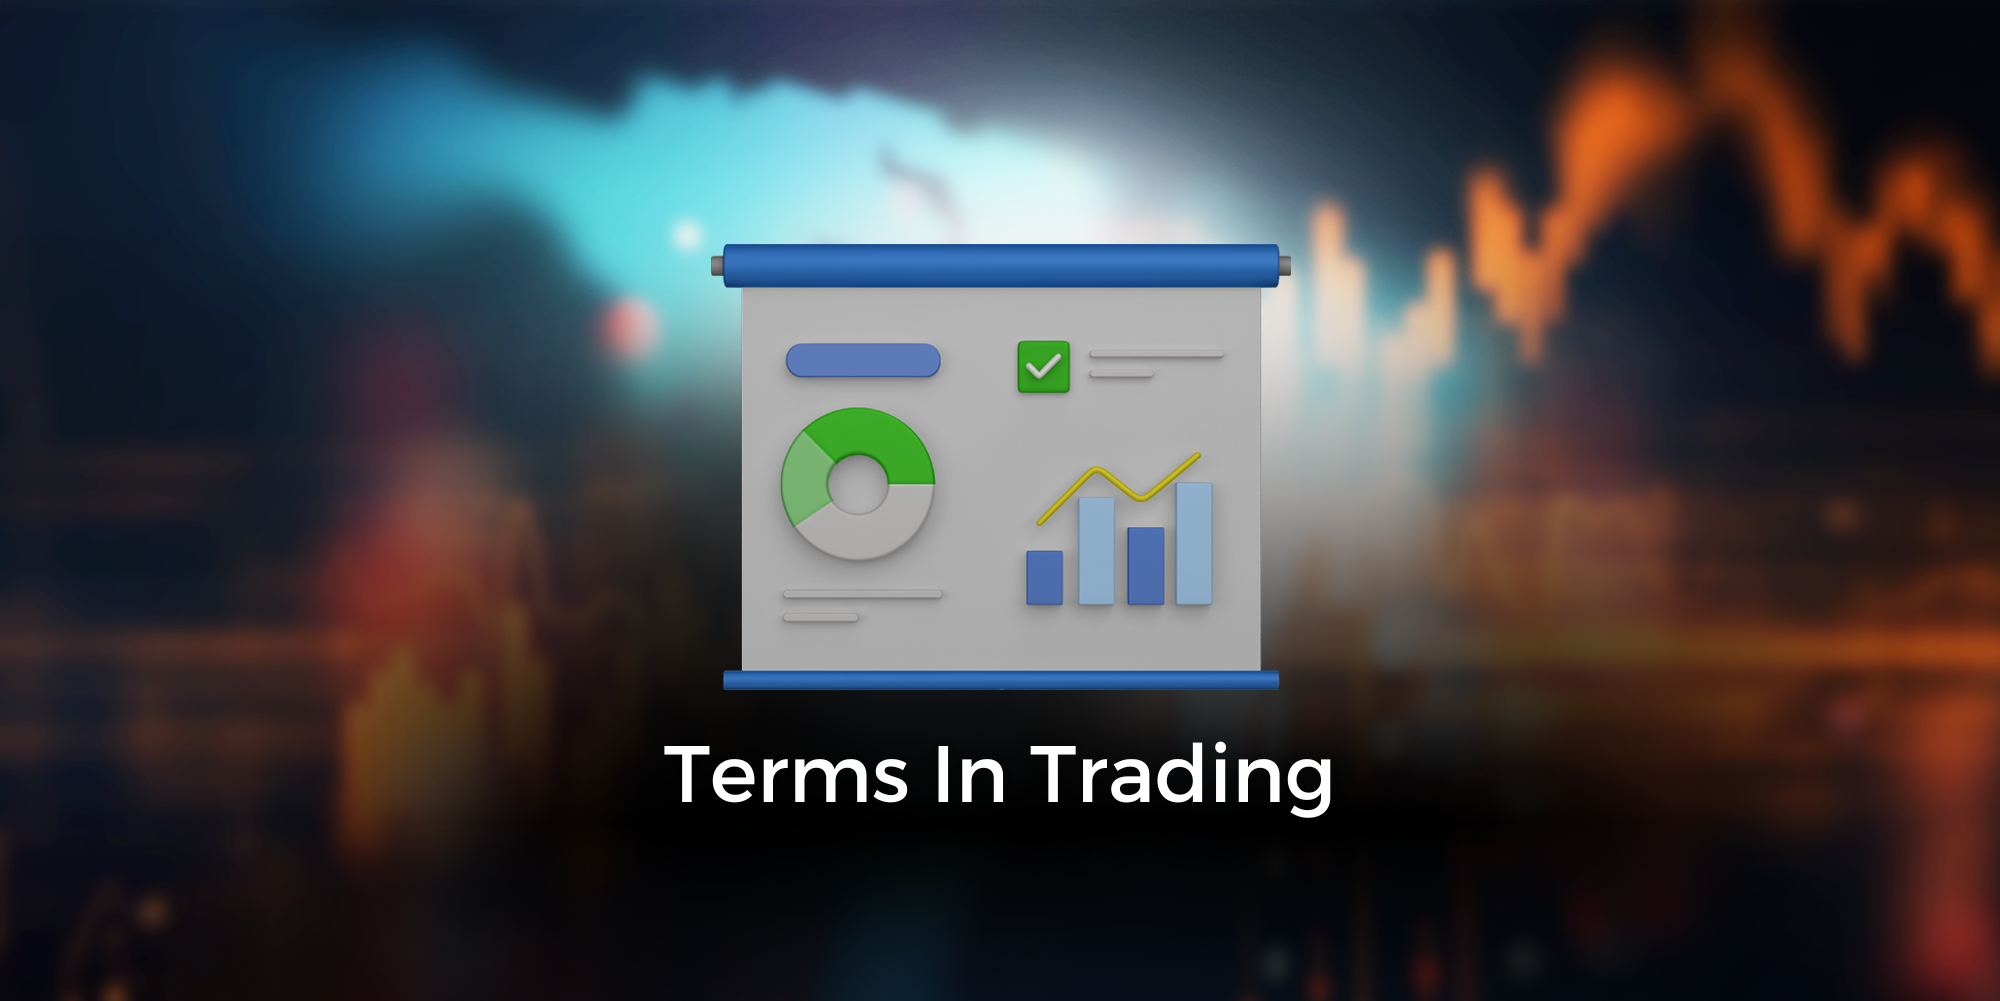 Terms In Trading